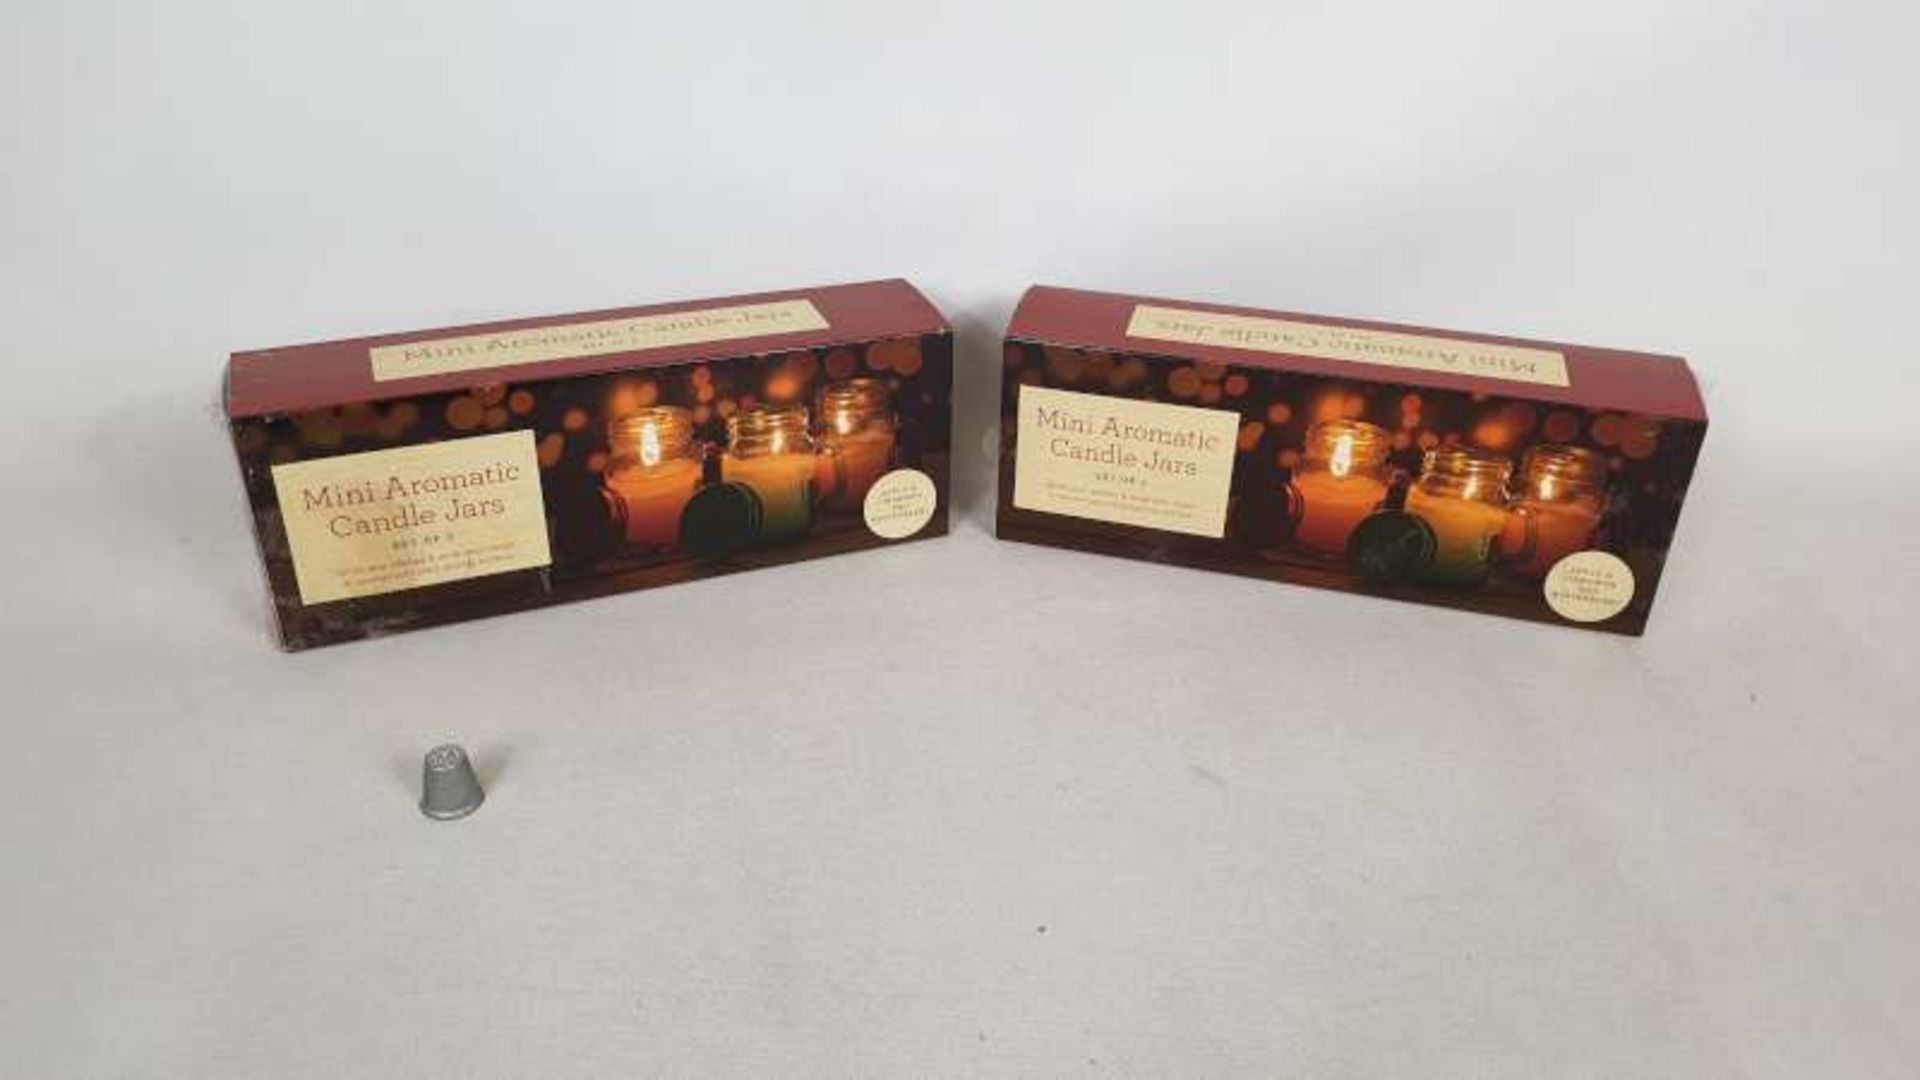 48 X SETS OF 3 MINI AROMATIC CANDLE JARS IN 4 BOXES